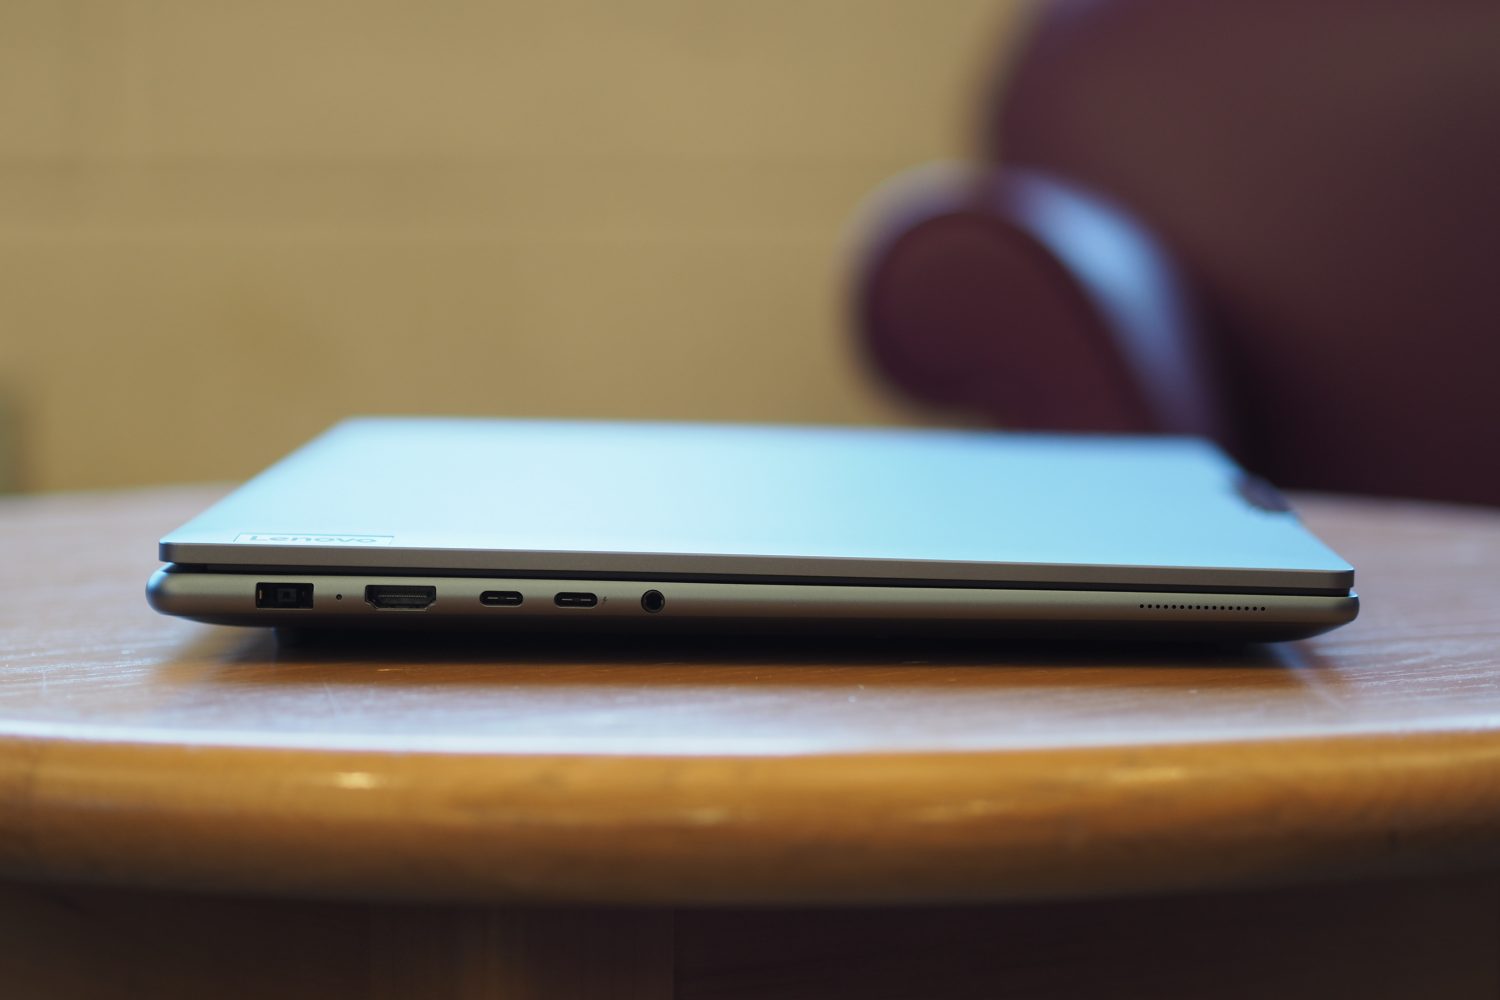 Why Lenovo’s latest pro laptop absolutely blew me away